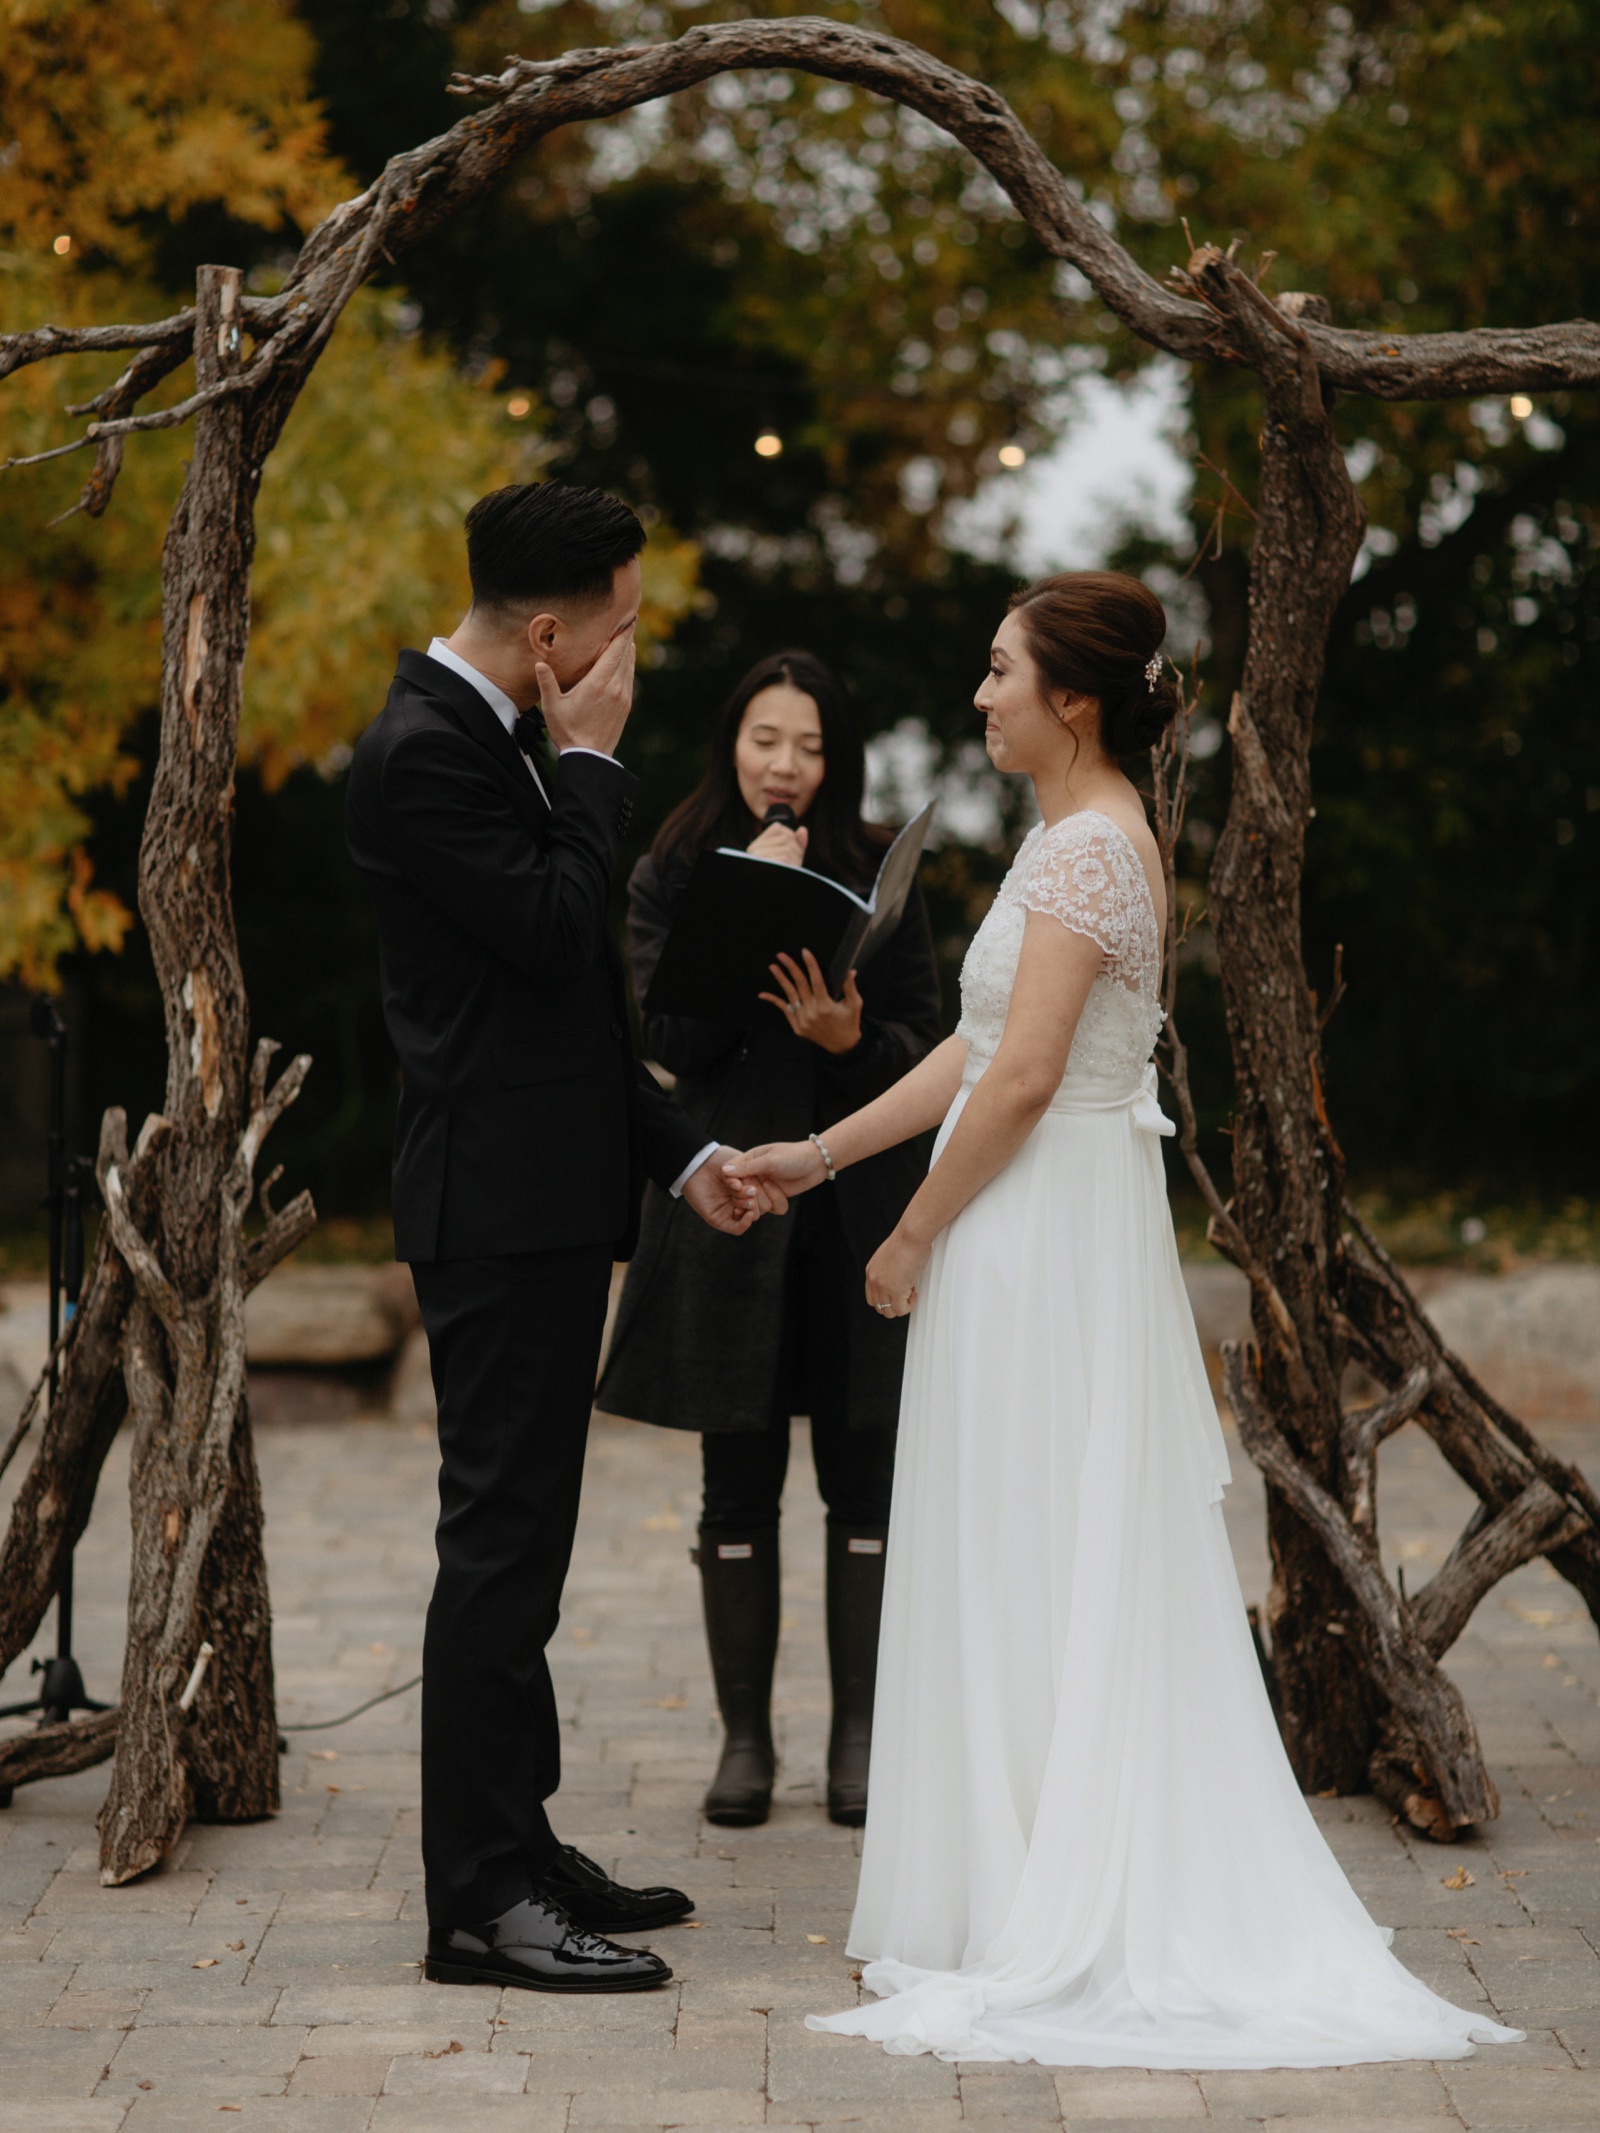 Groom wiping a tear from his eye under a twisted wood arch